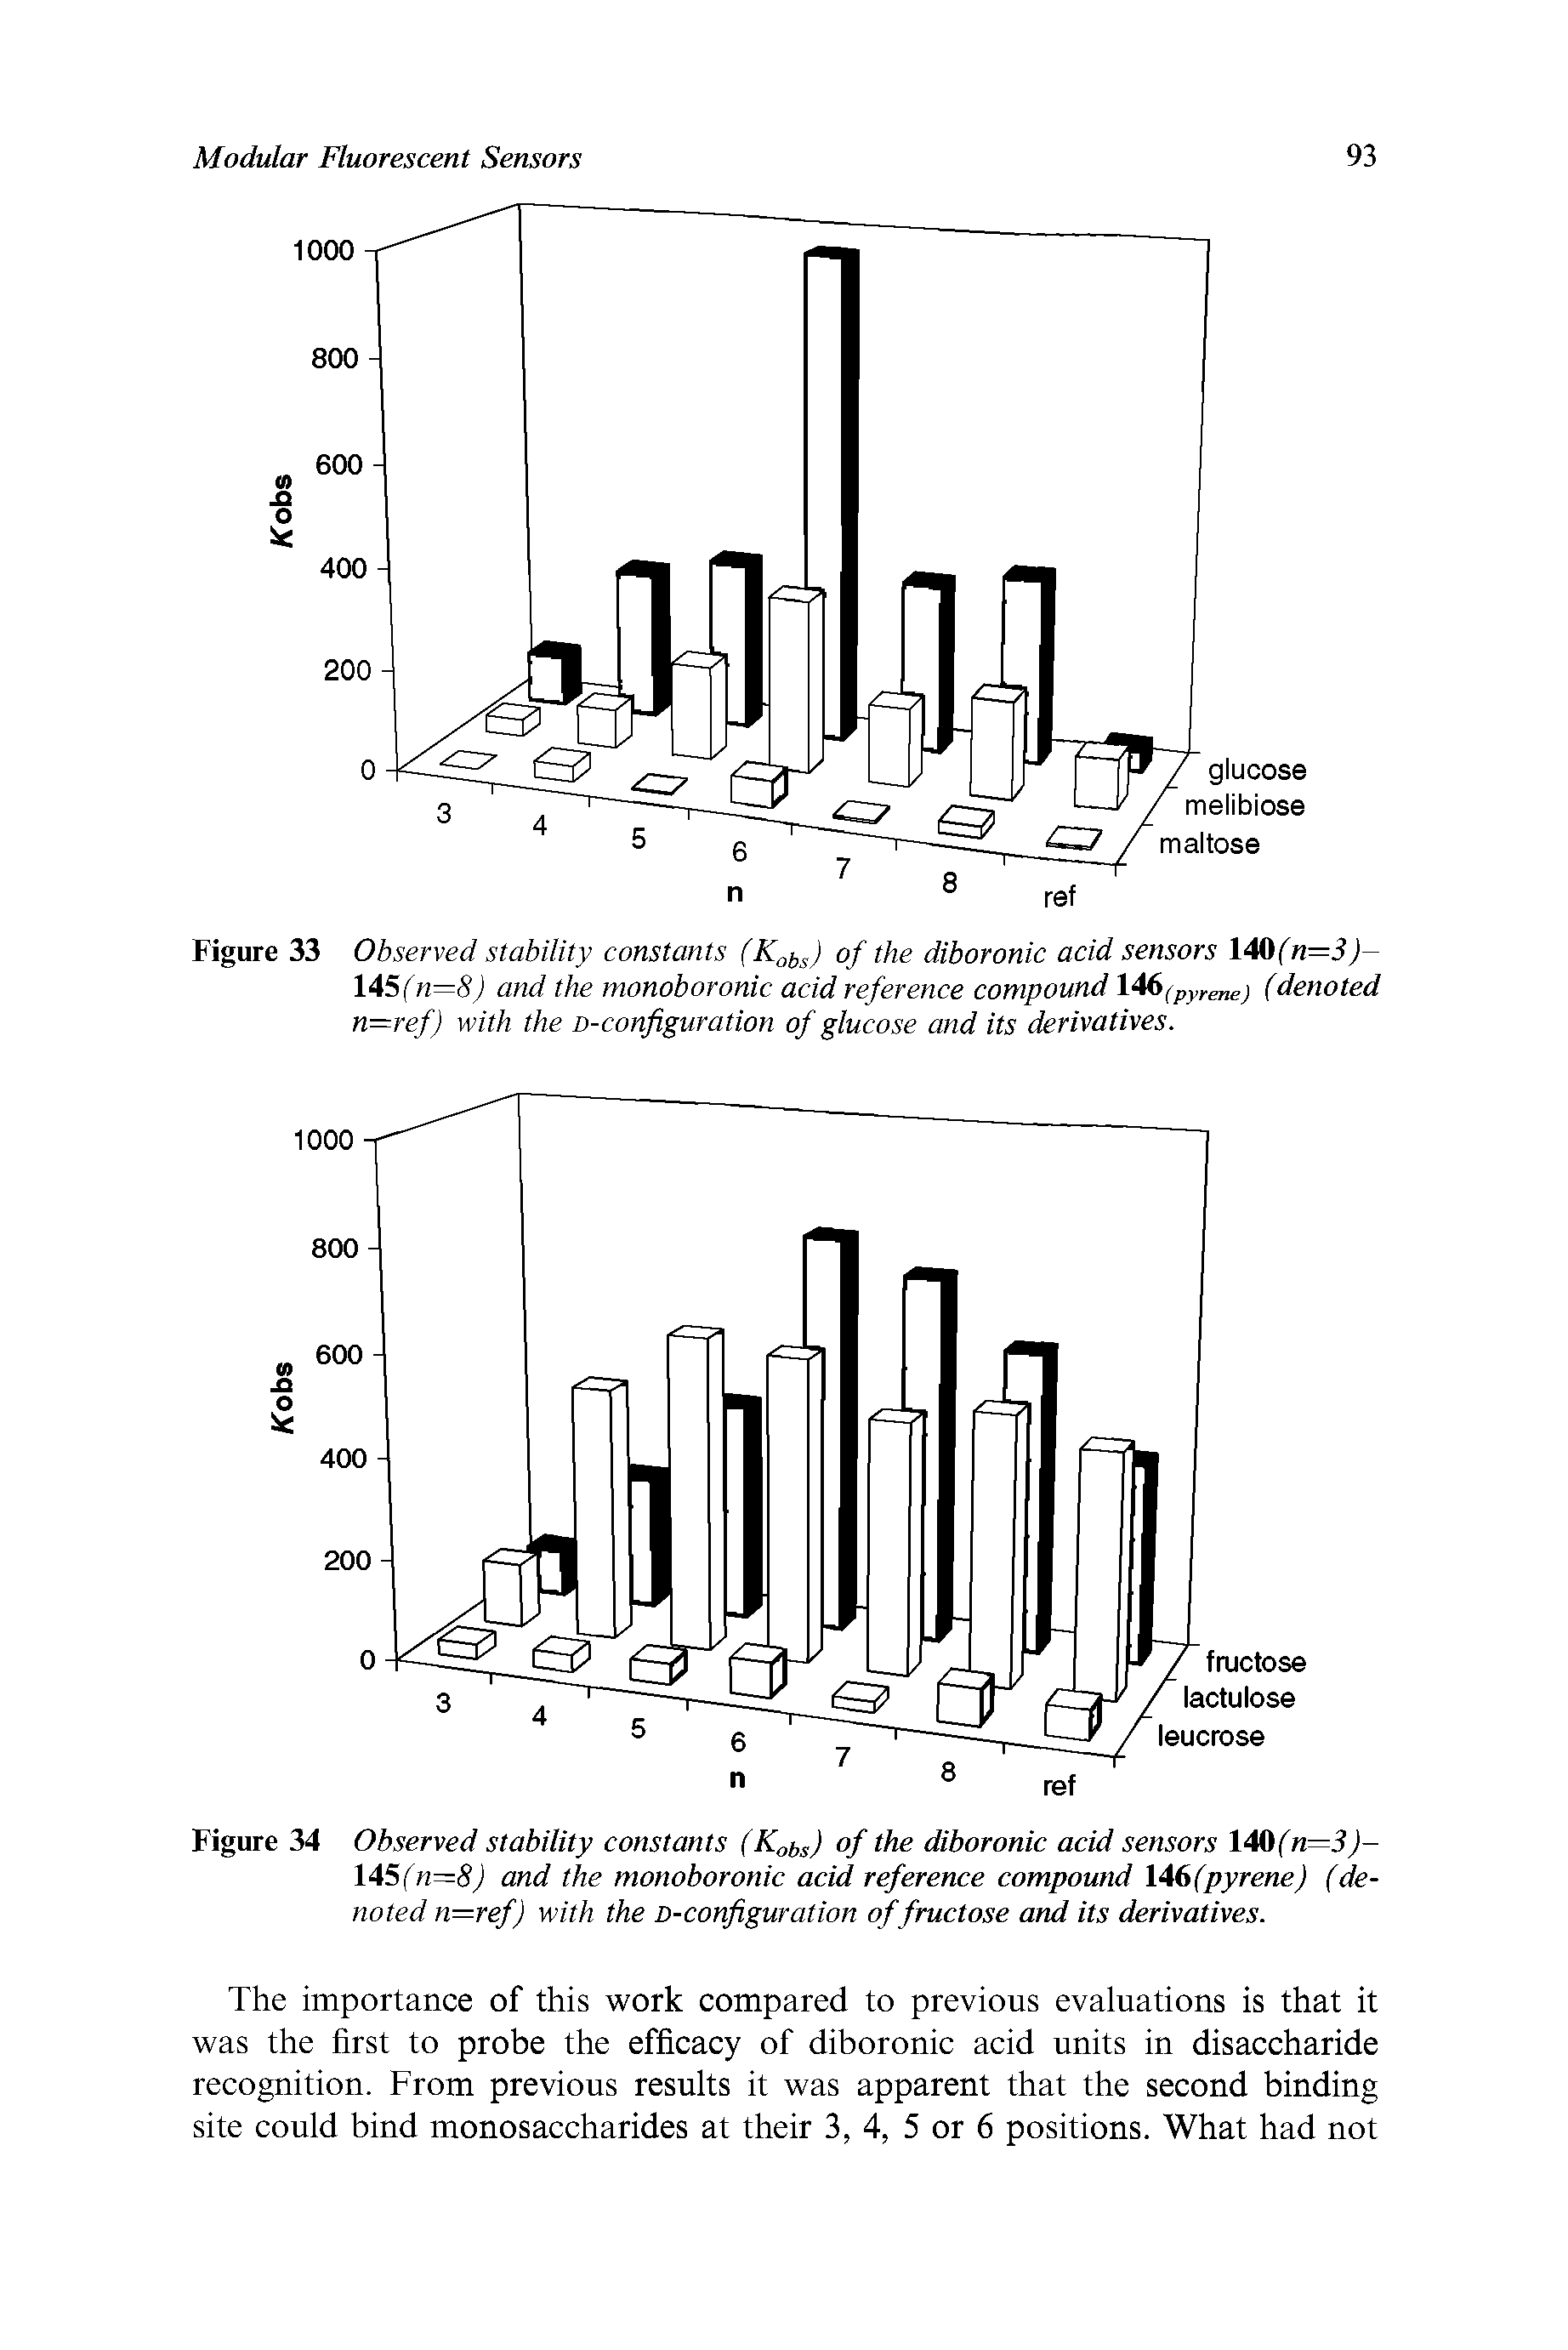 Figure 33 Observed stability constants (Kabs) of the diboronic acid sensors 140fn=3j-145fn—8) and the monoboronic acid reference compound 146(pyrene) (denoted n=ref) with the D-configuration of glucose and its derivatives.